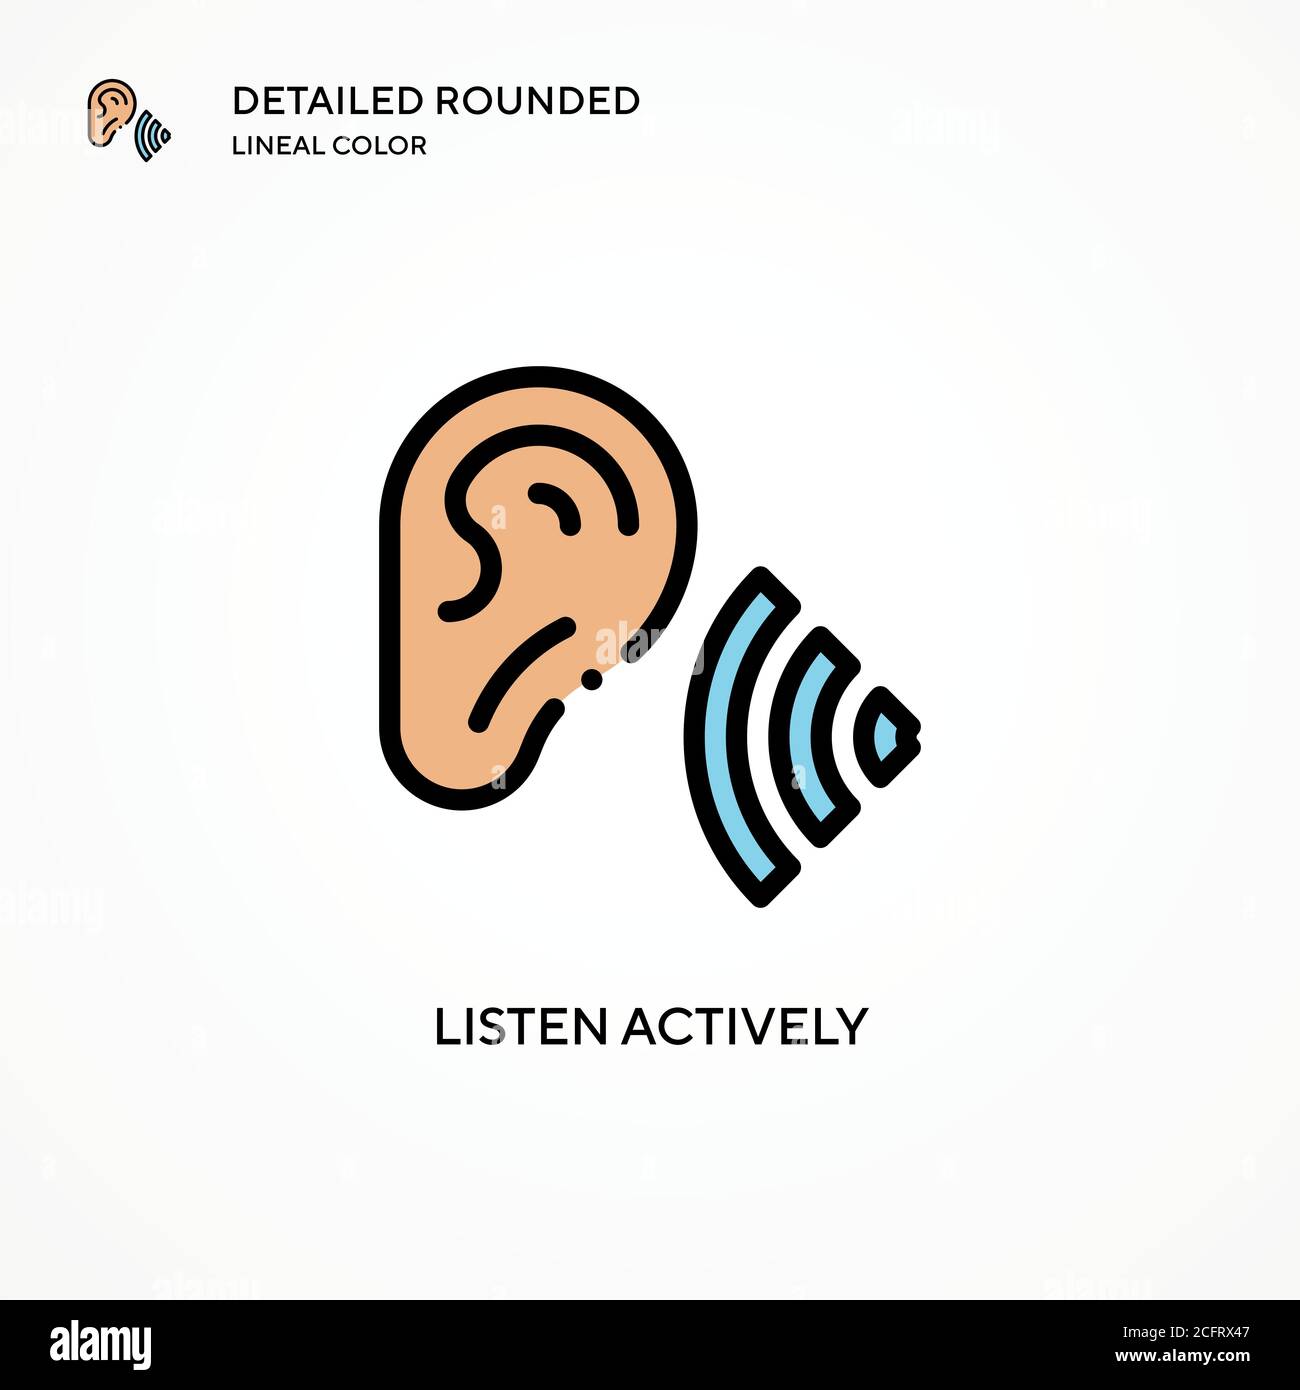 Listen actively vector icon. Modern vector illustration concepts. Easy to edit and customize. Stock Vector